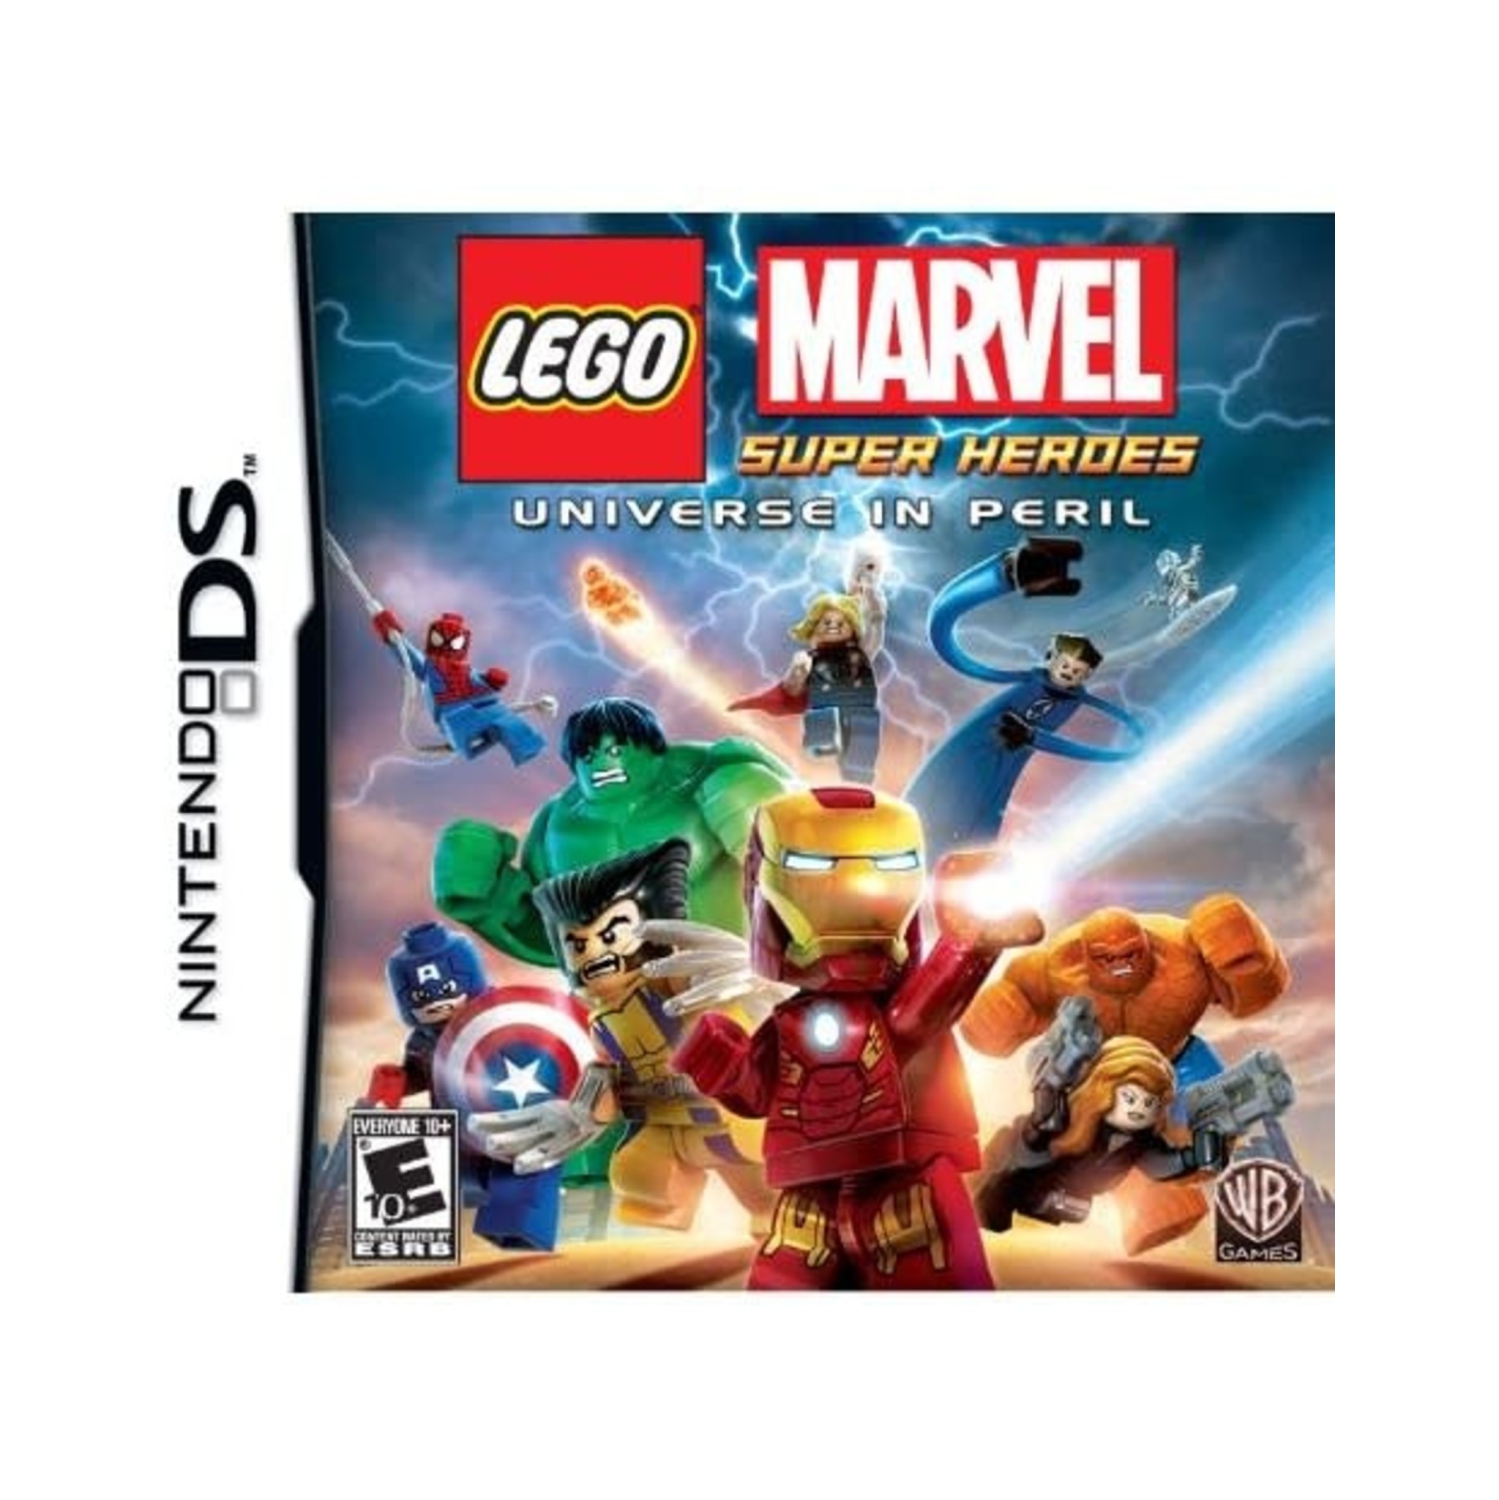 Previously Played - Lego Marvel Super Heroes for Nintendo DS